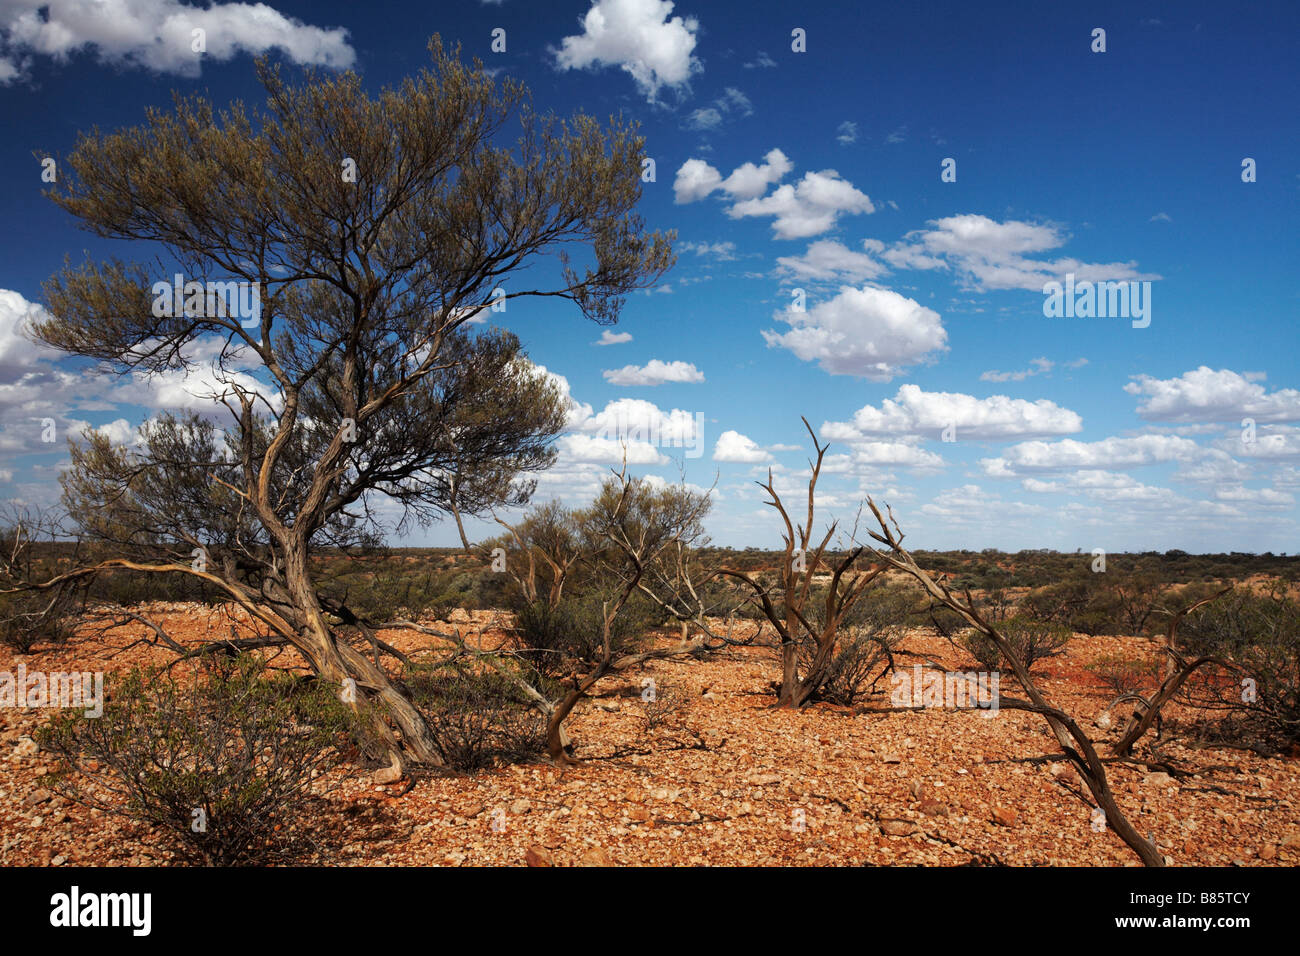 Outback in South Australia near Coober Pedy Stock Photo